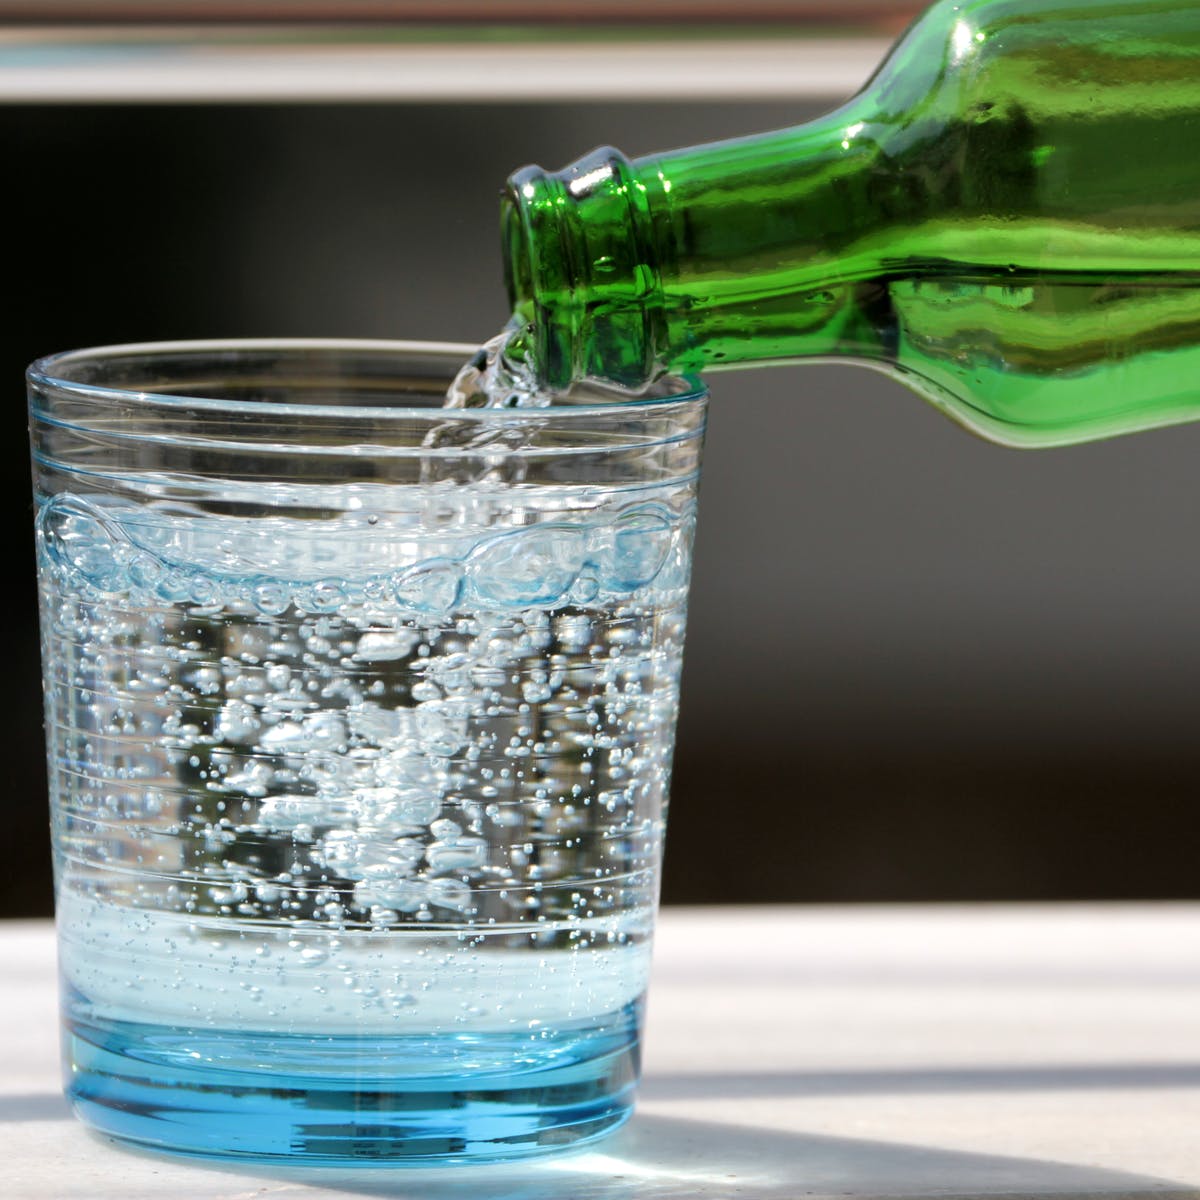 Can I drink sparkling water while I'm fasting?